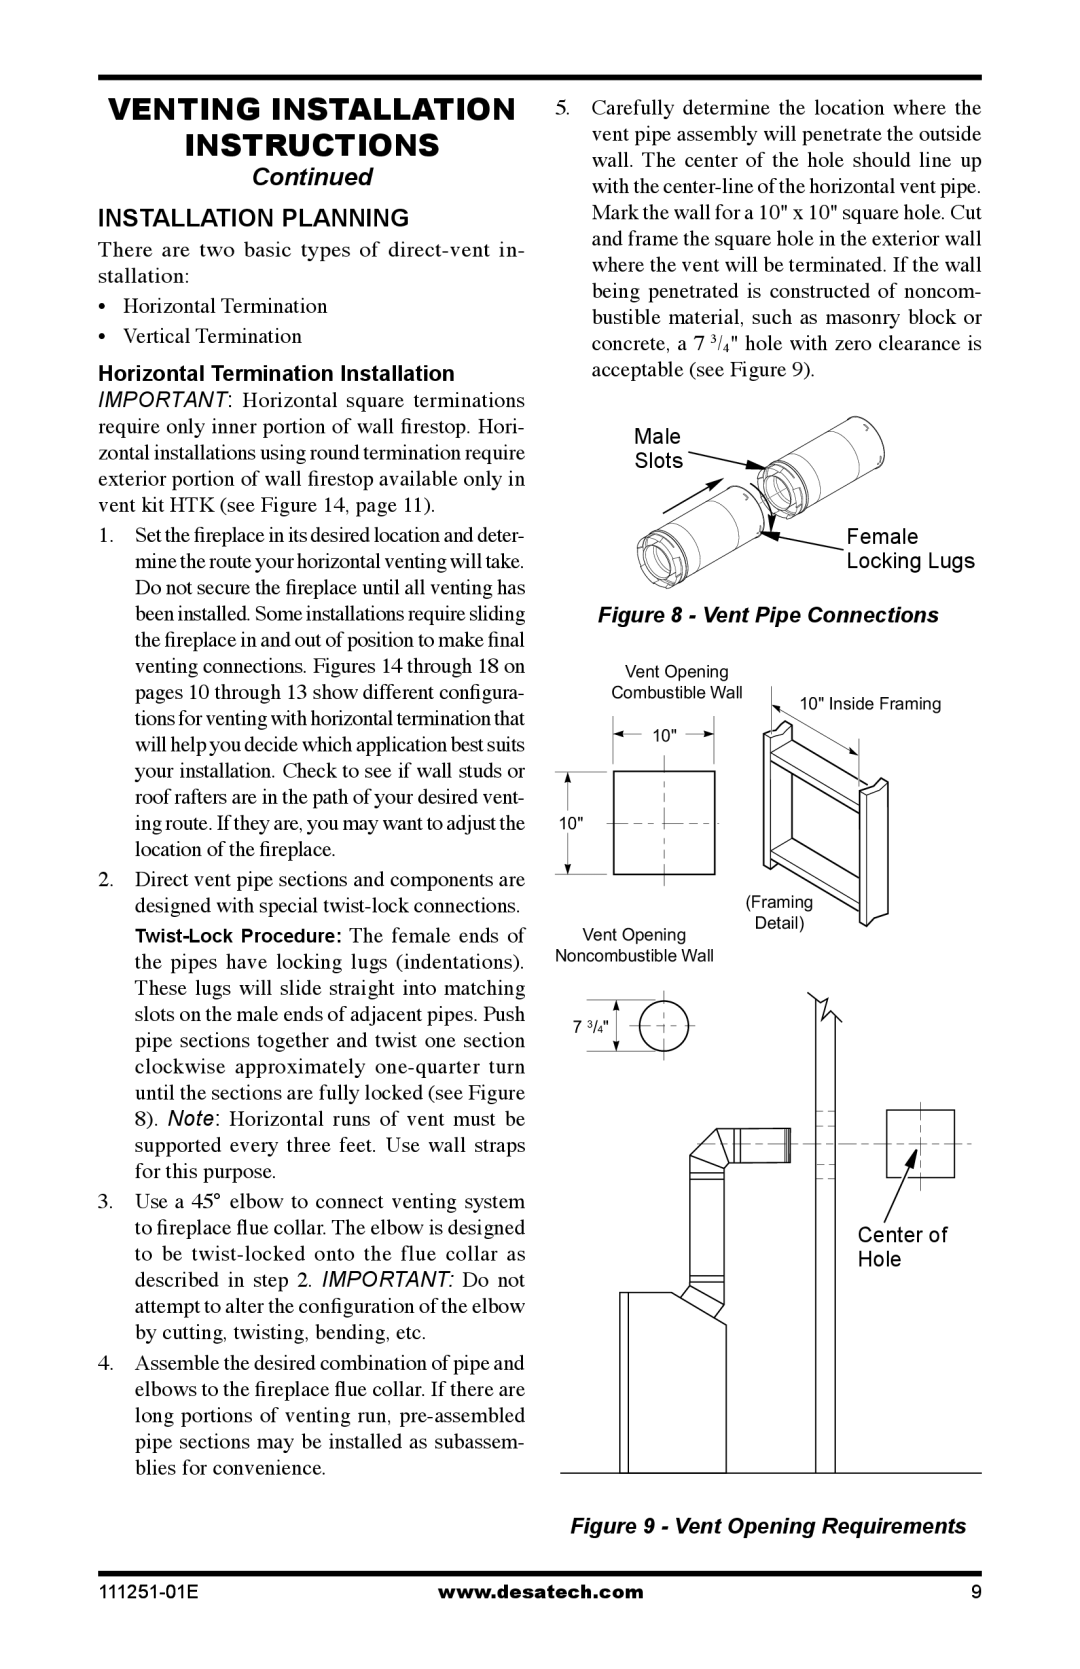 Desa (V)T36EPA Venting Installation instructions, Continued, Installation Planning, Vent Pipe Connections 